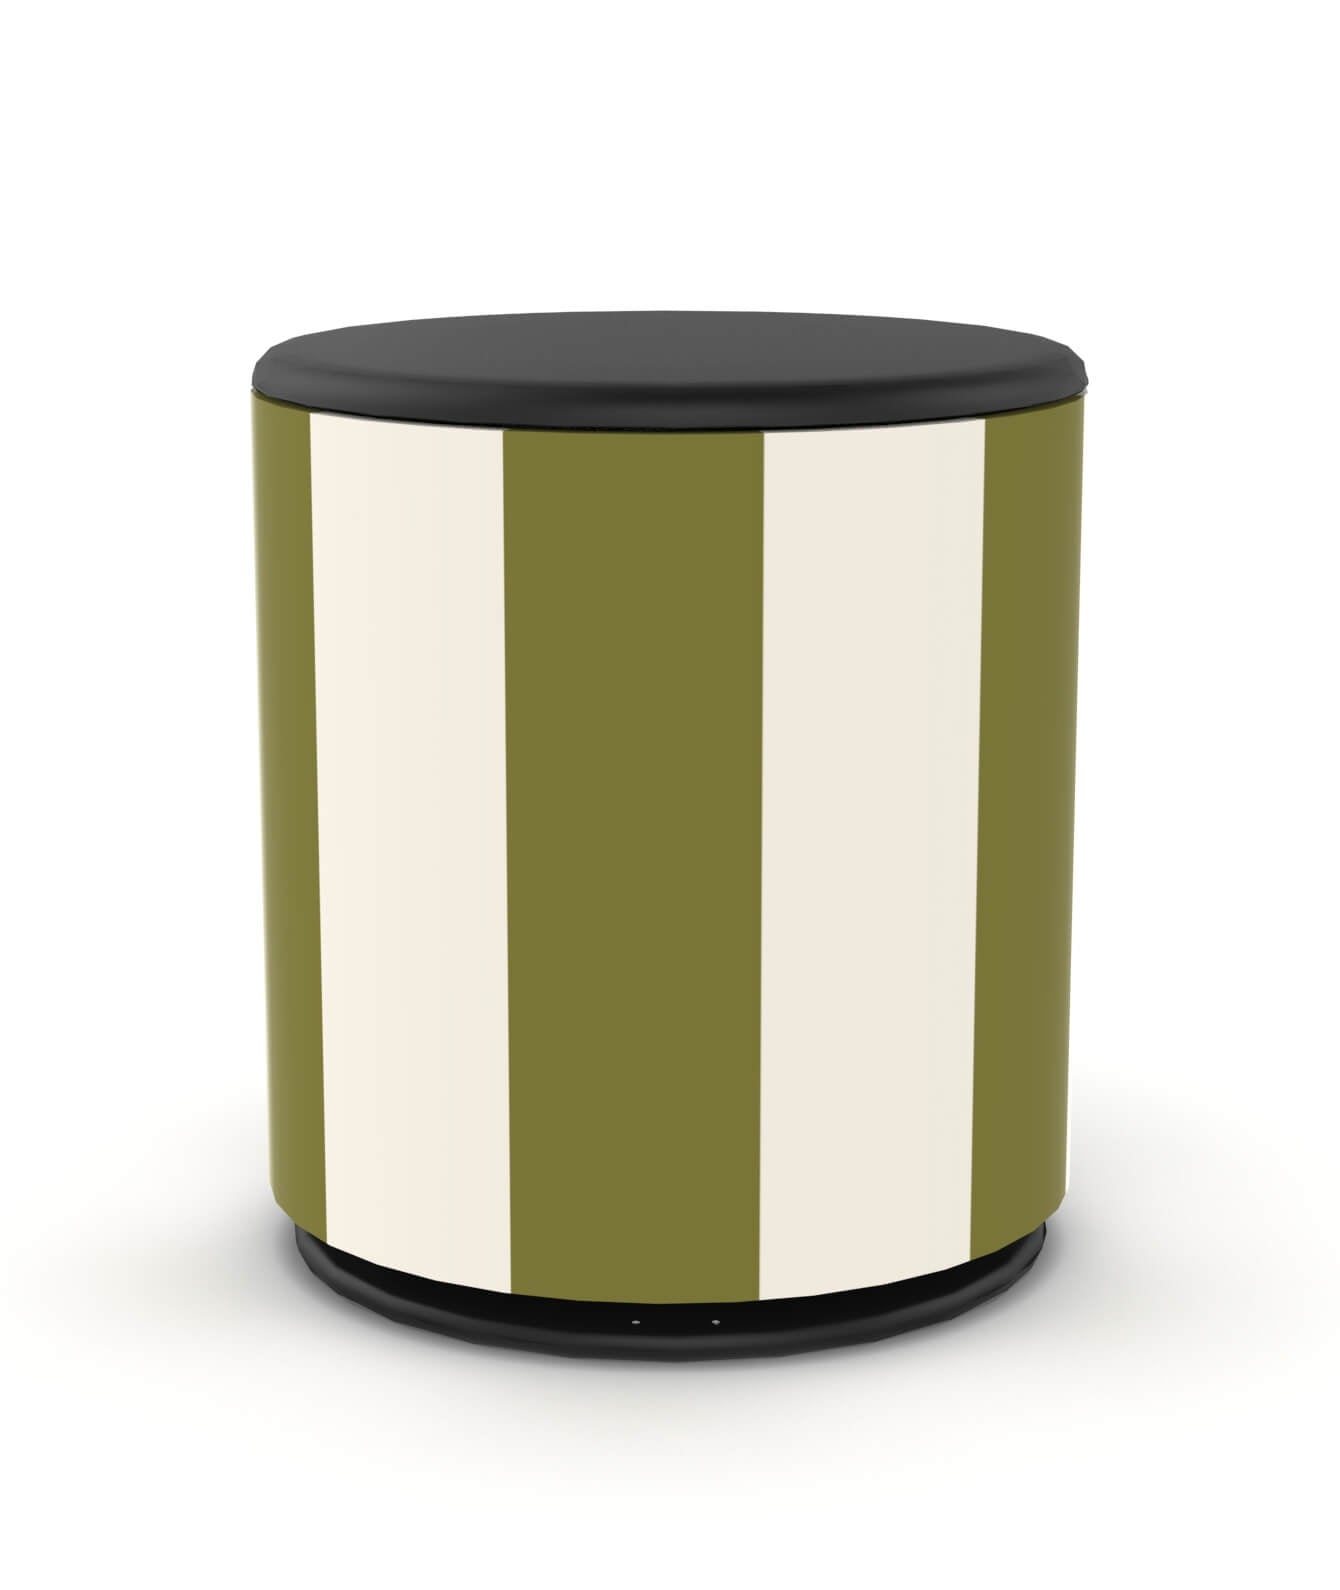 Skiniplay cover olive for Bang & Olufsen Beoplay M5 speaker